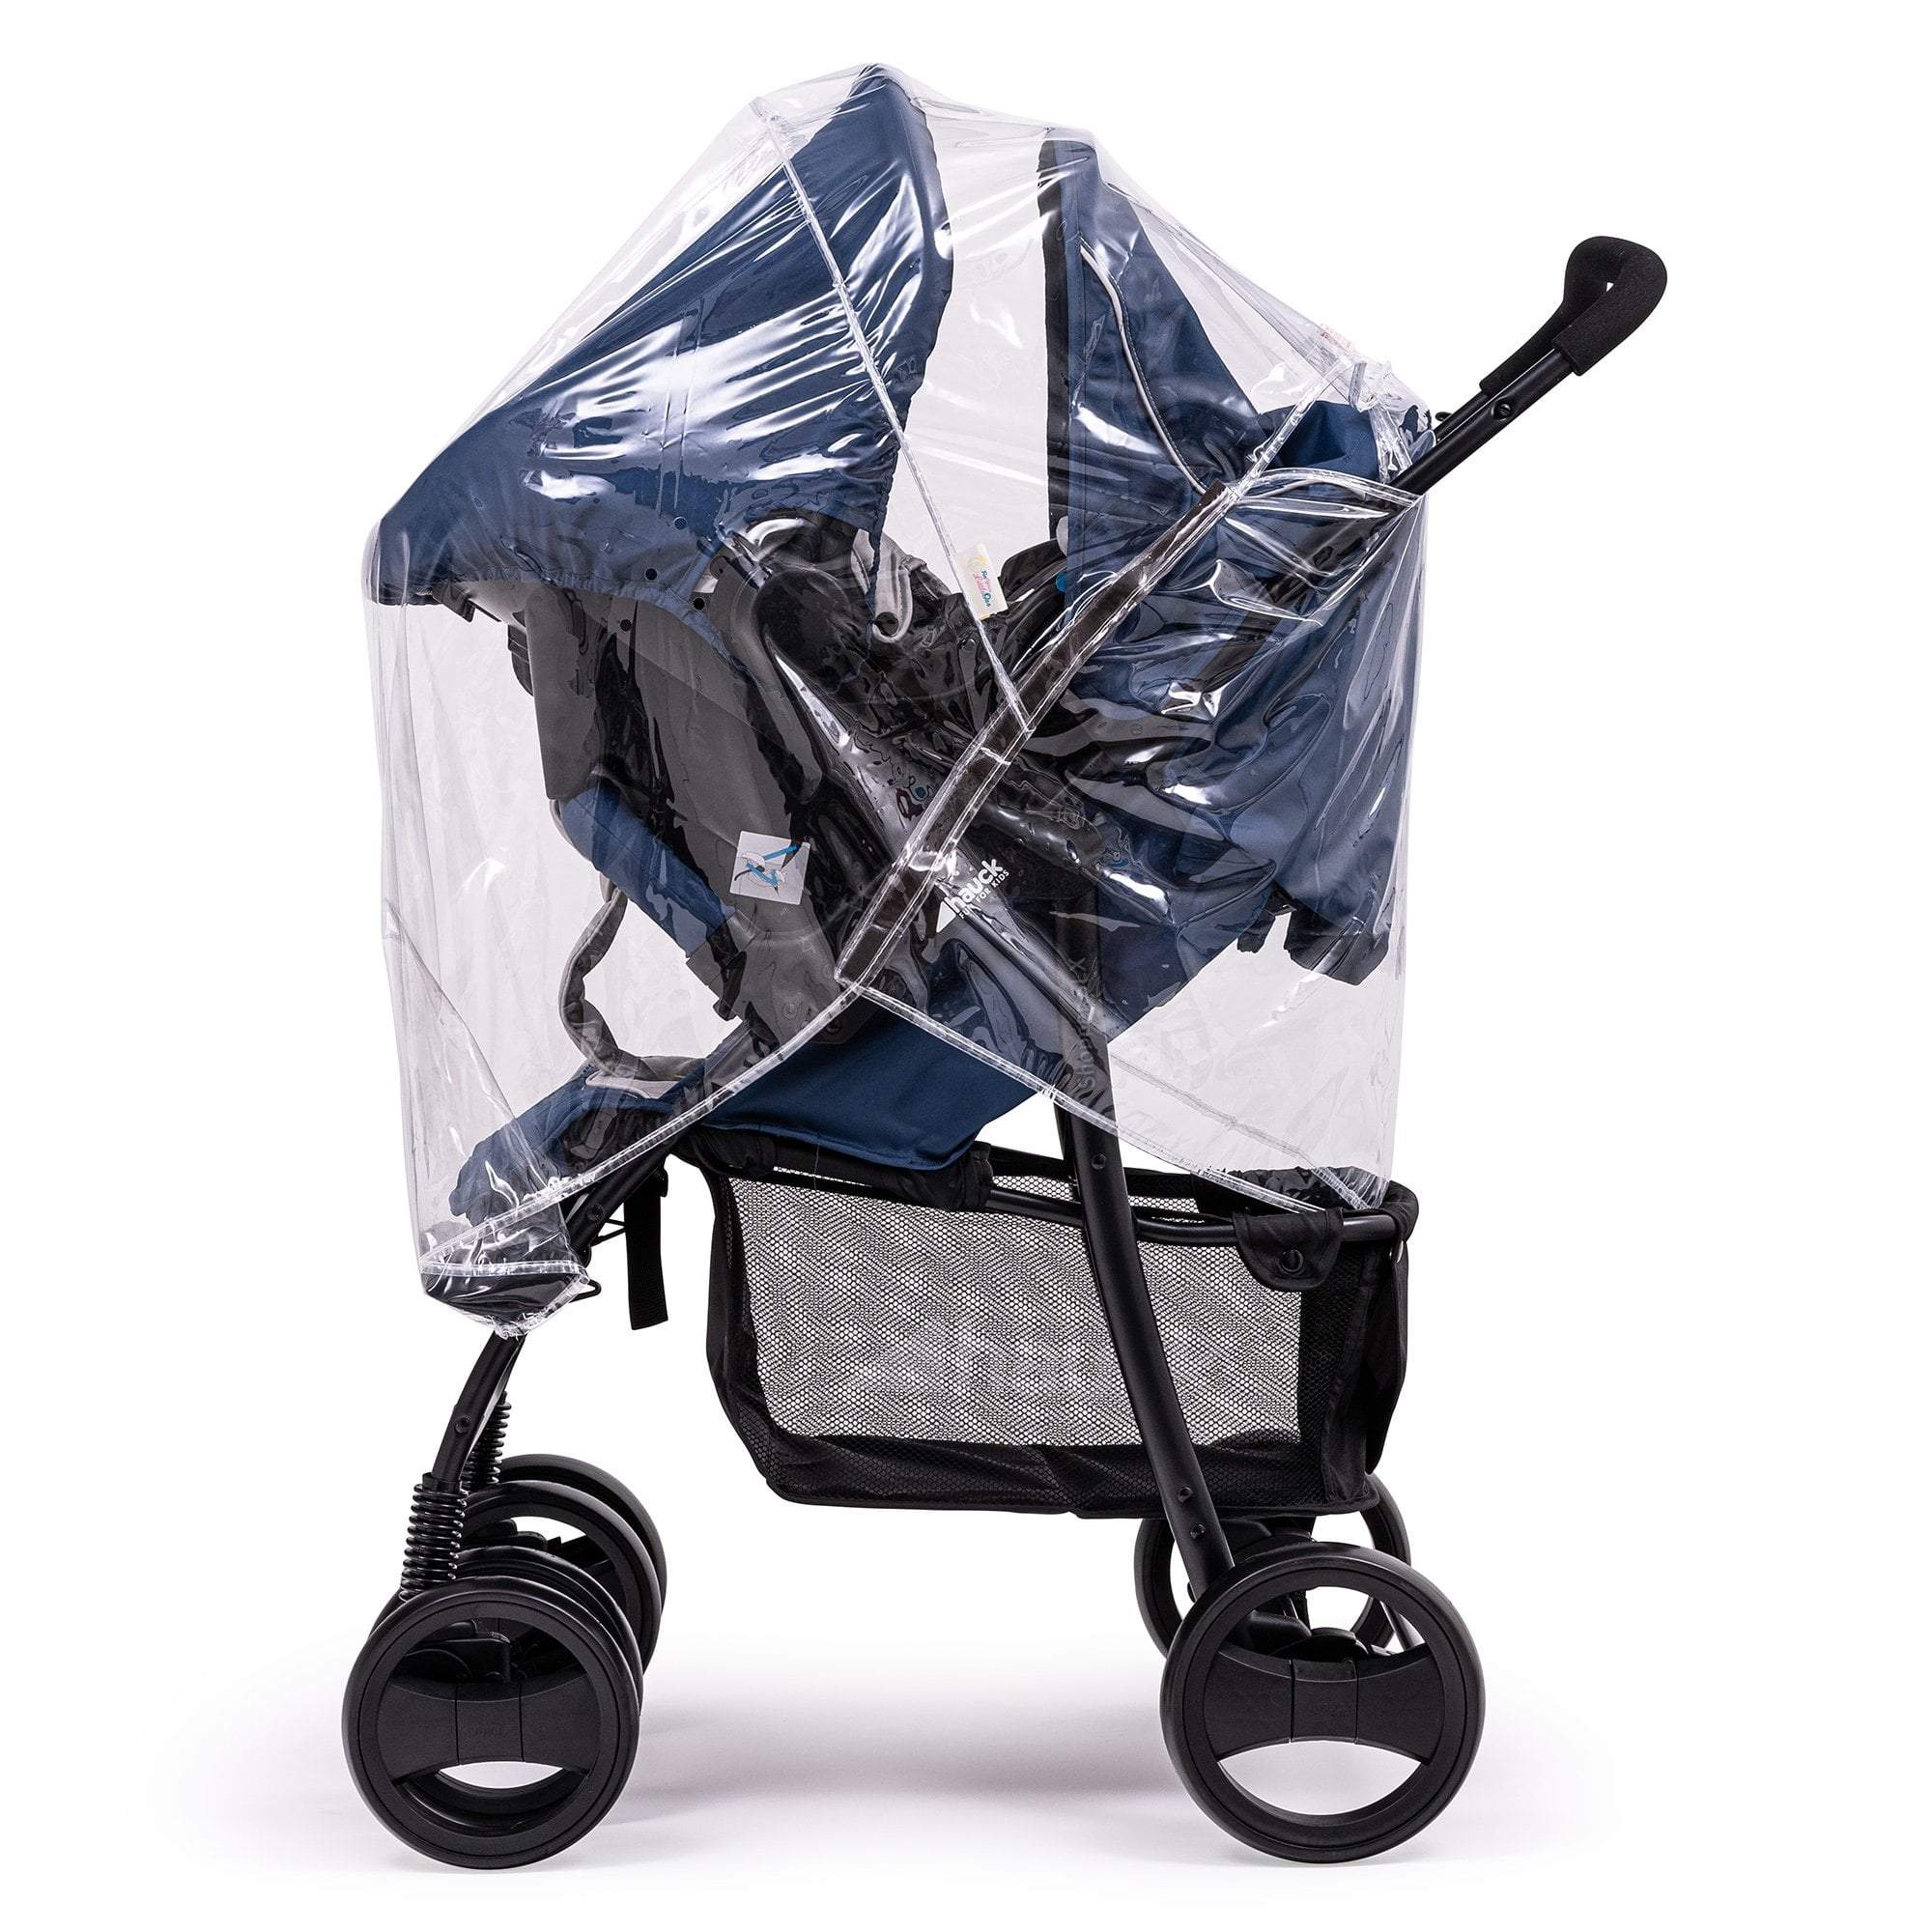 Travel System Raincover Compatible with Emmaljunga - Fits All Models - For Your Little One